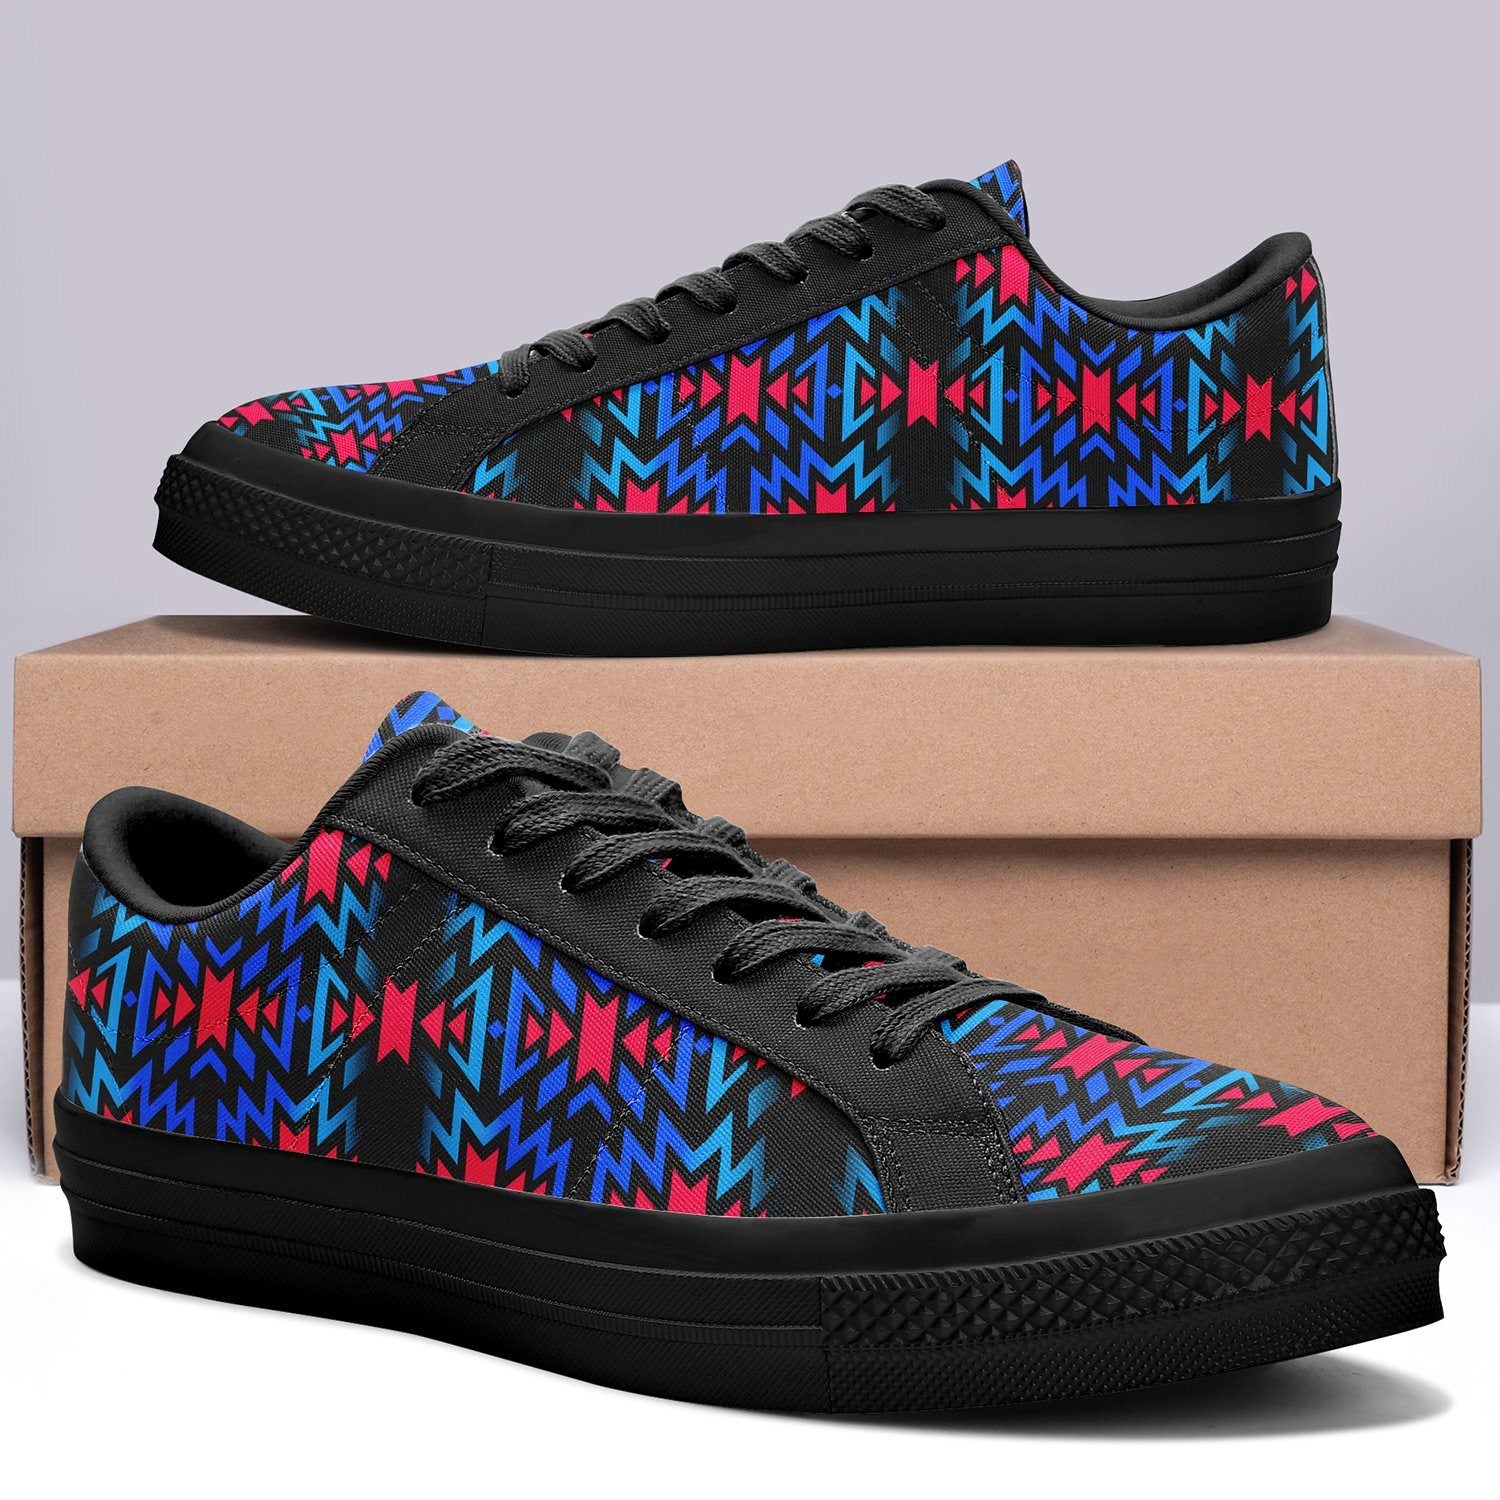 Black Fire Dragonfly Aapisi Low Top Canvas Shoes Black Sole 49 Dzine 